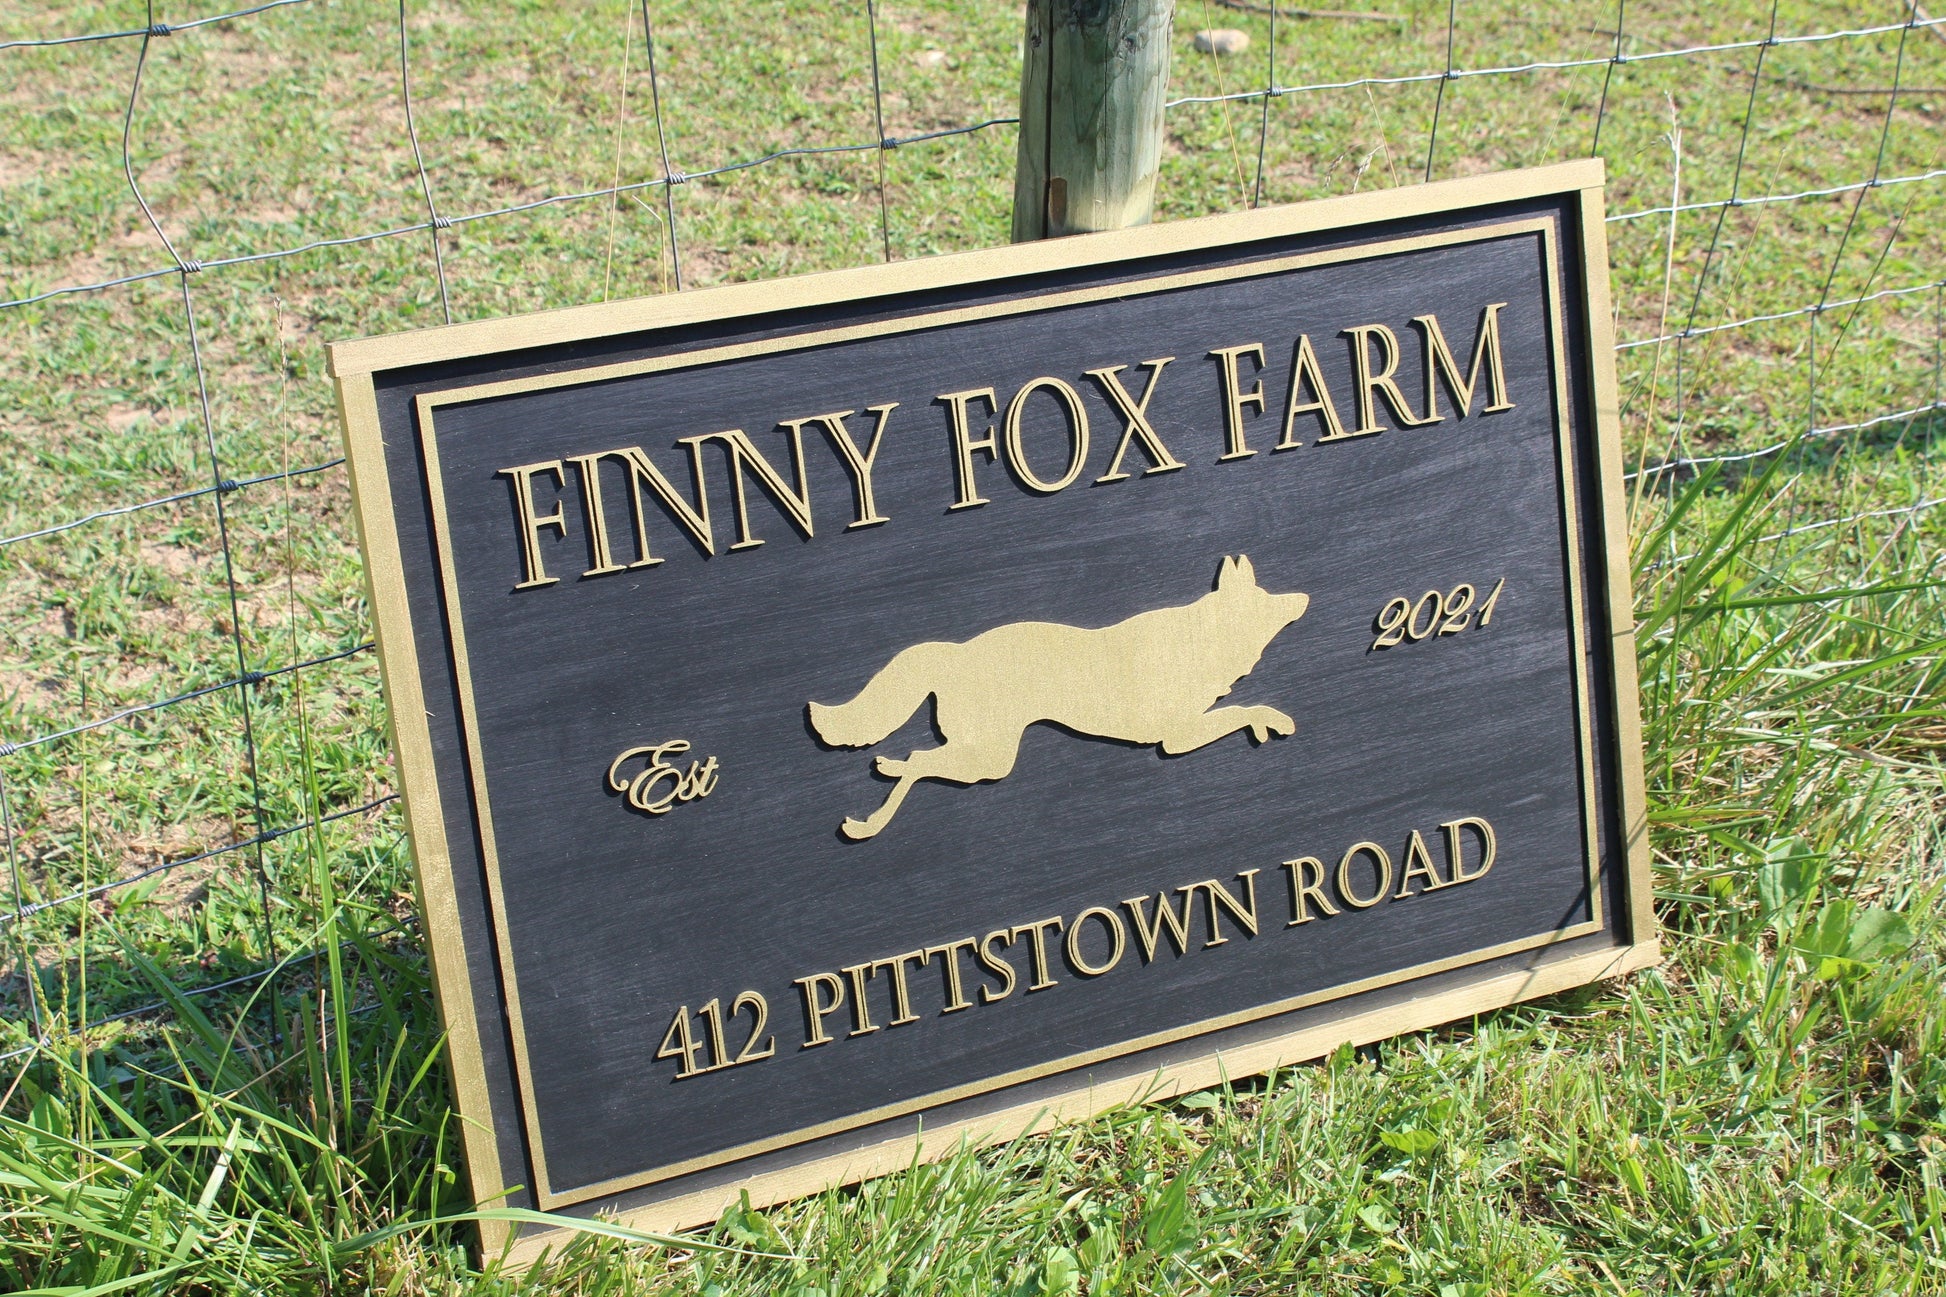 Large Commercial Signage Custom Farm Sign Outdoor Address Use My Logo Graphic Office Small Business Entrance Established Finny Fox Farms